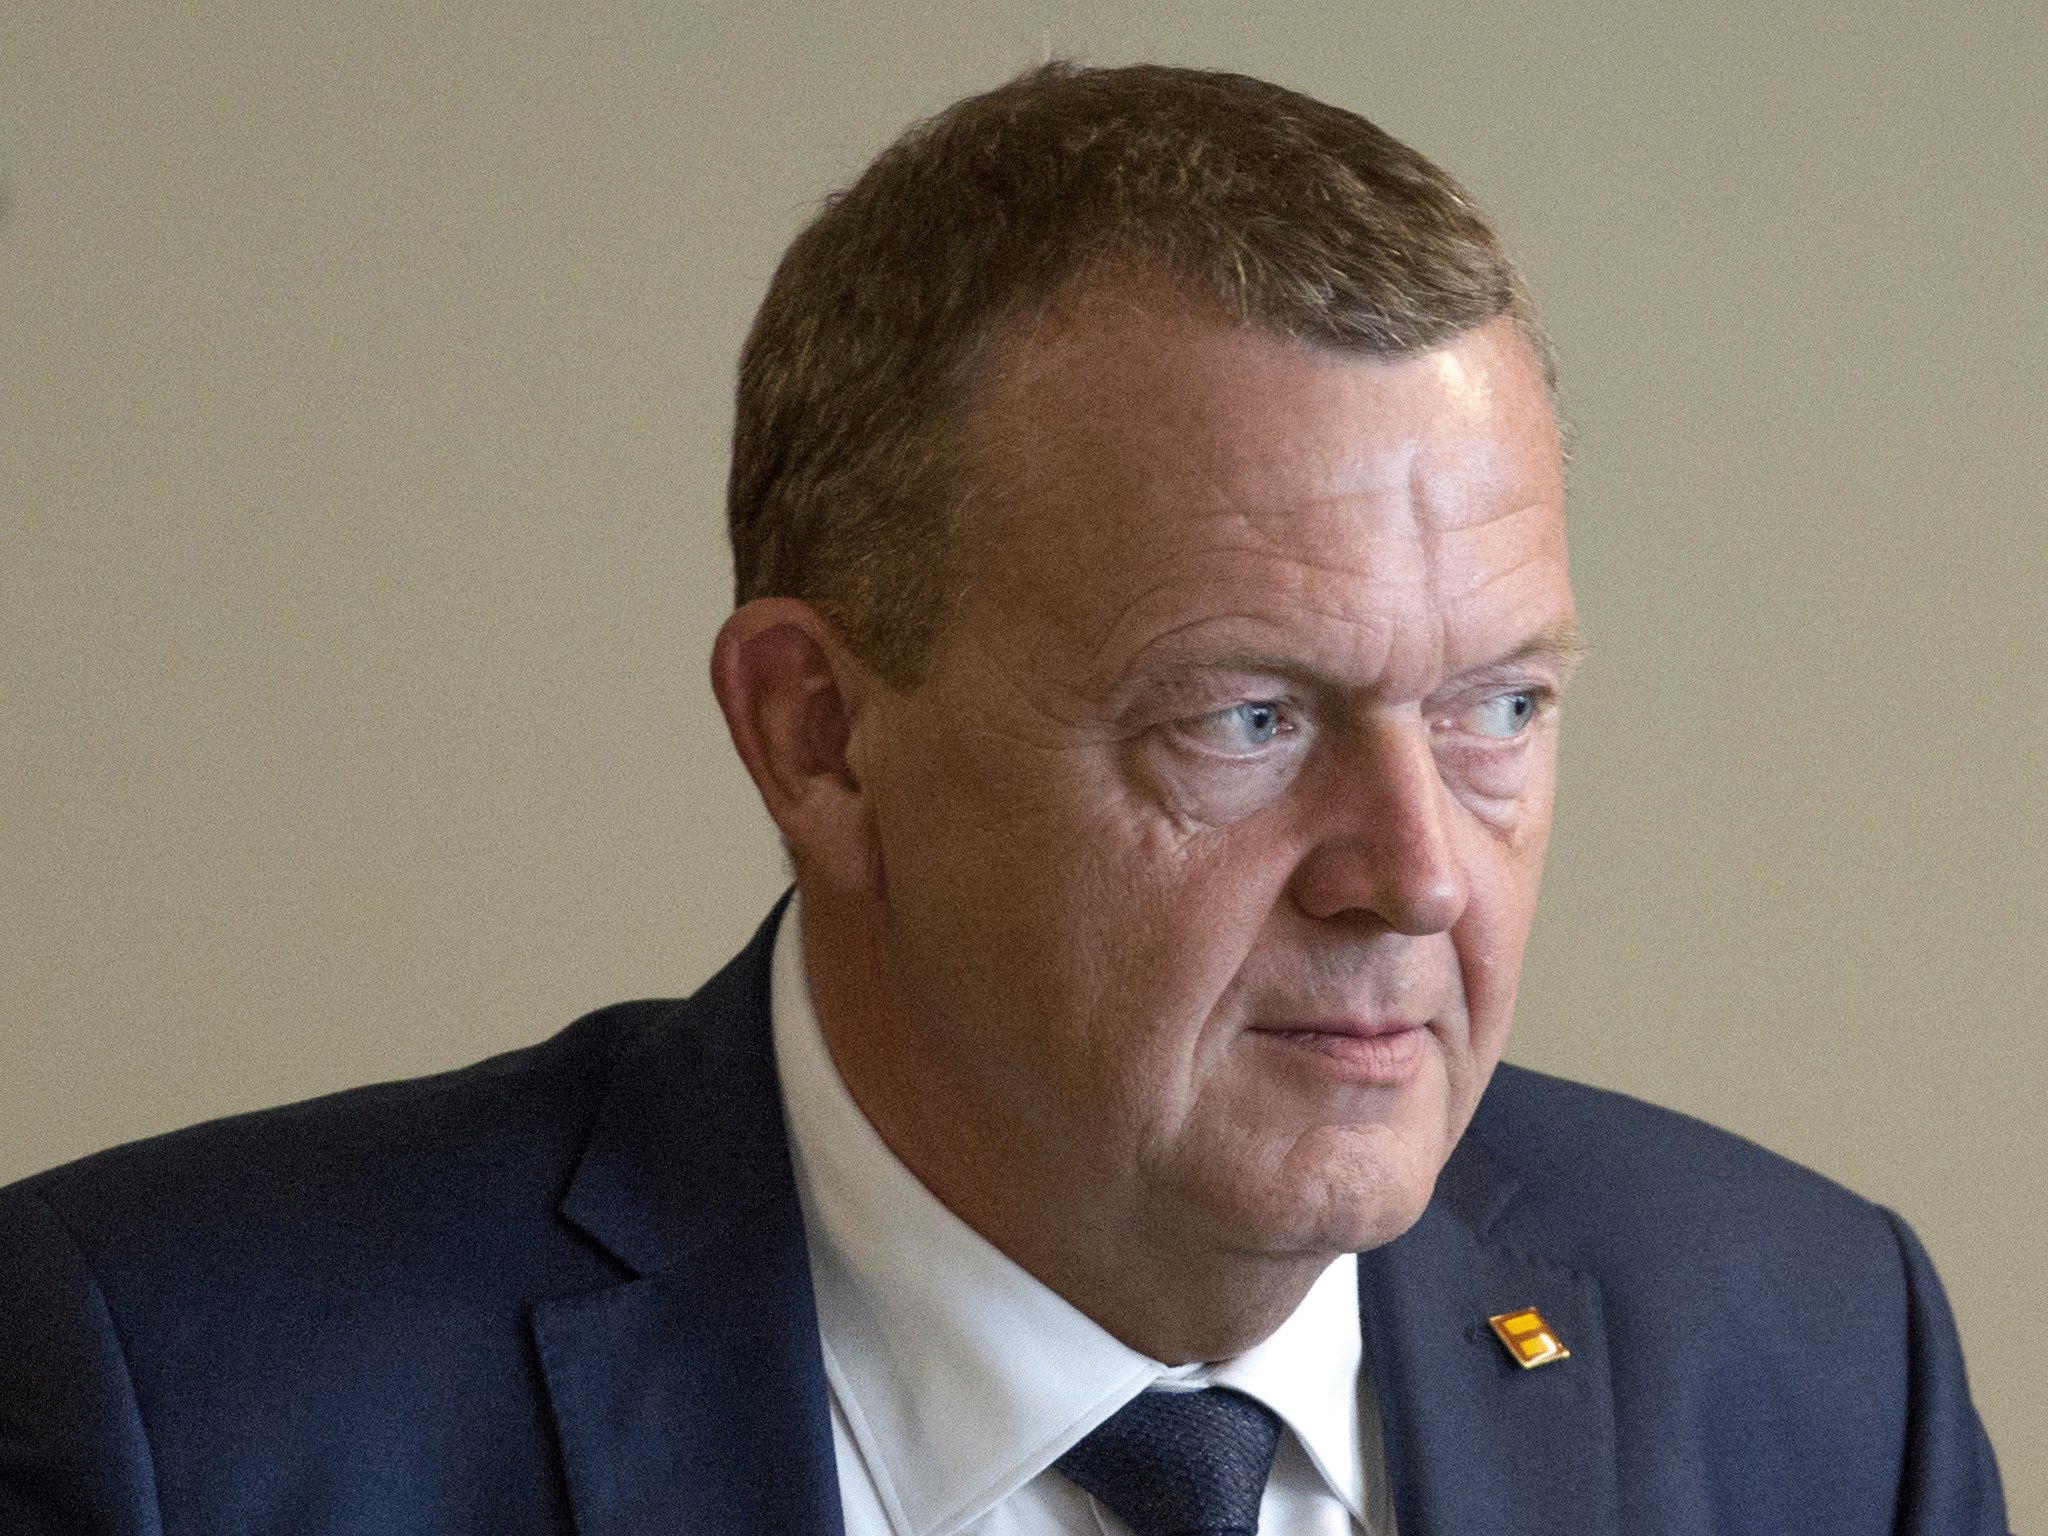 Danish prime minister Lars Lokke Rasmussen has come under fire for his government's anti-immigration reforms